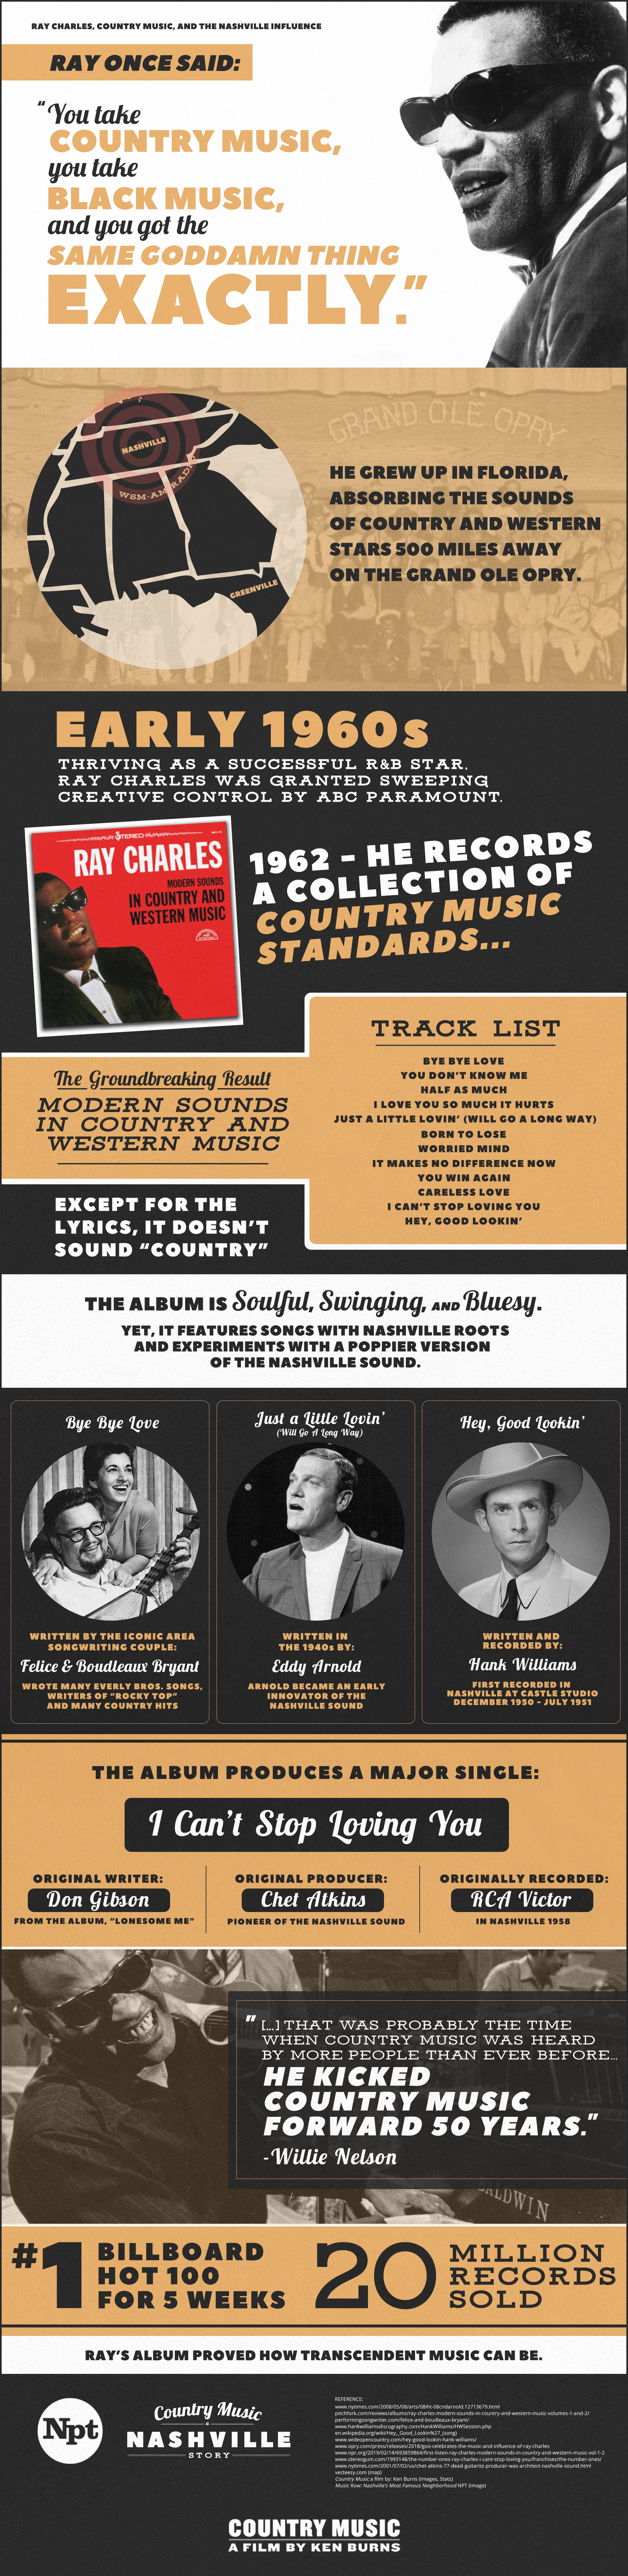 Ray Charles Modern Sounds in Country and Western Music Infographic